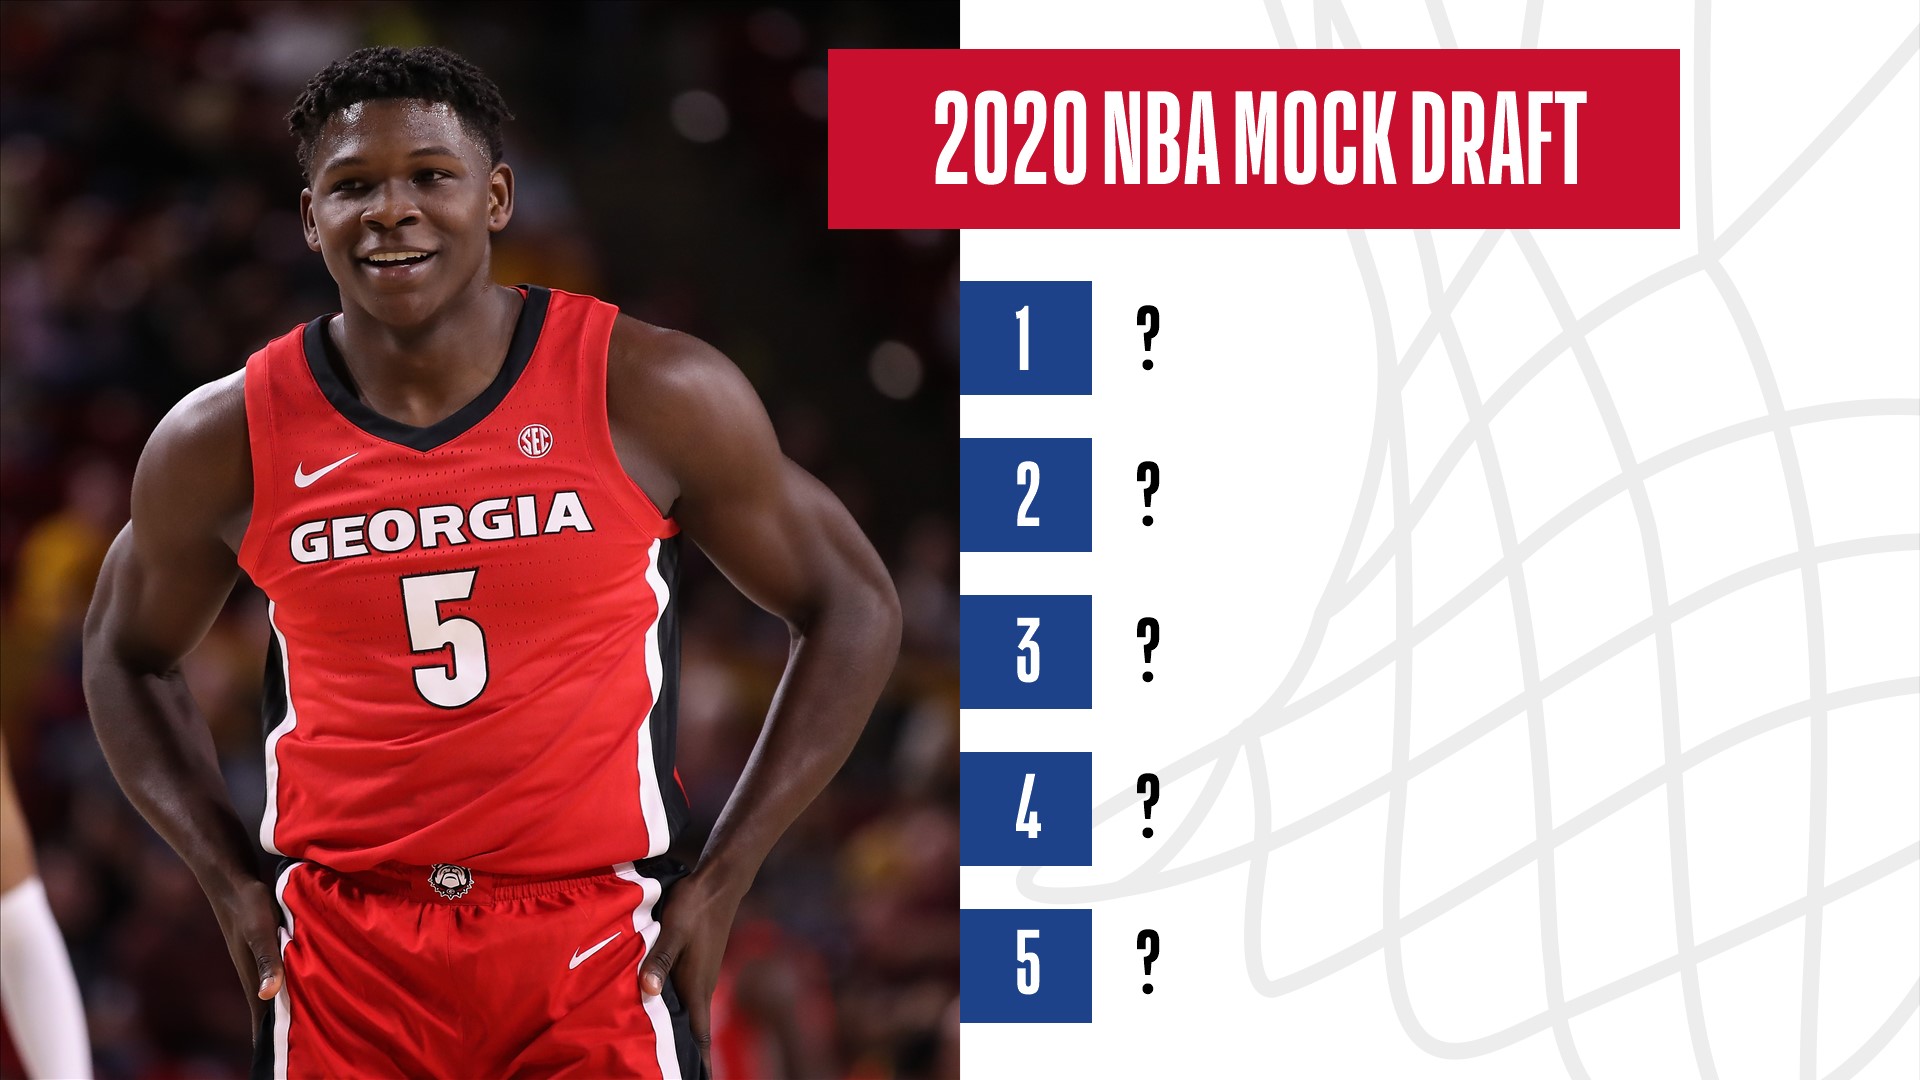 2020 Nba Mock Draft Will Anthony Edwards Or Lamelo Ball Go No 1 Nba Com Australia The Official Site Of The Nba